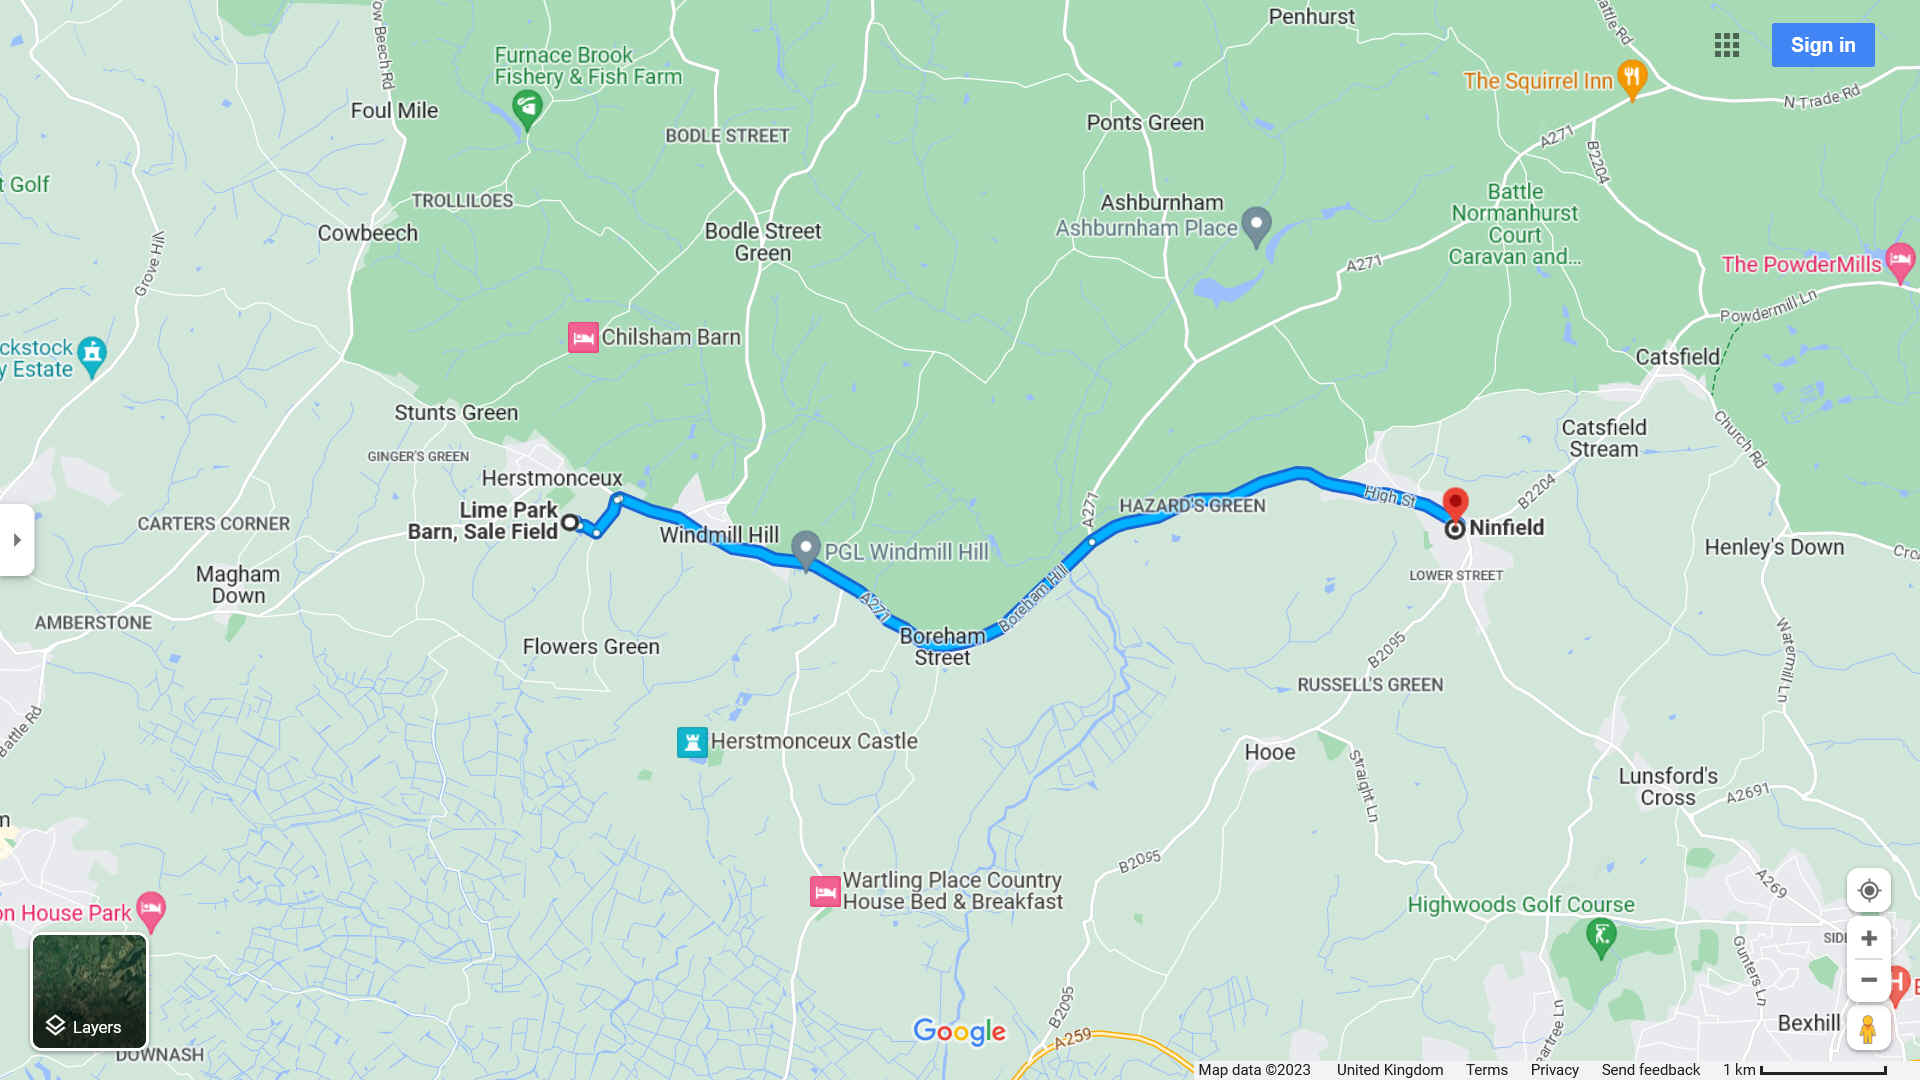 Map showing route to and from Herstmonceux Museum, and Ninfield